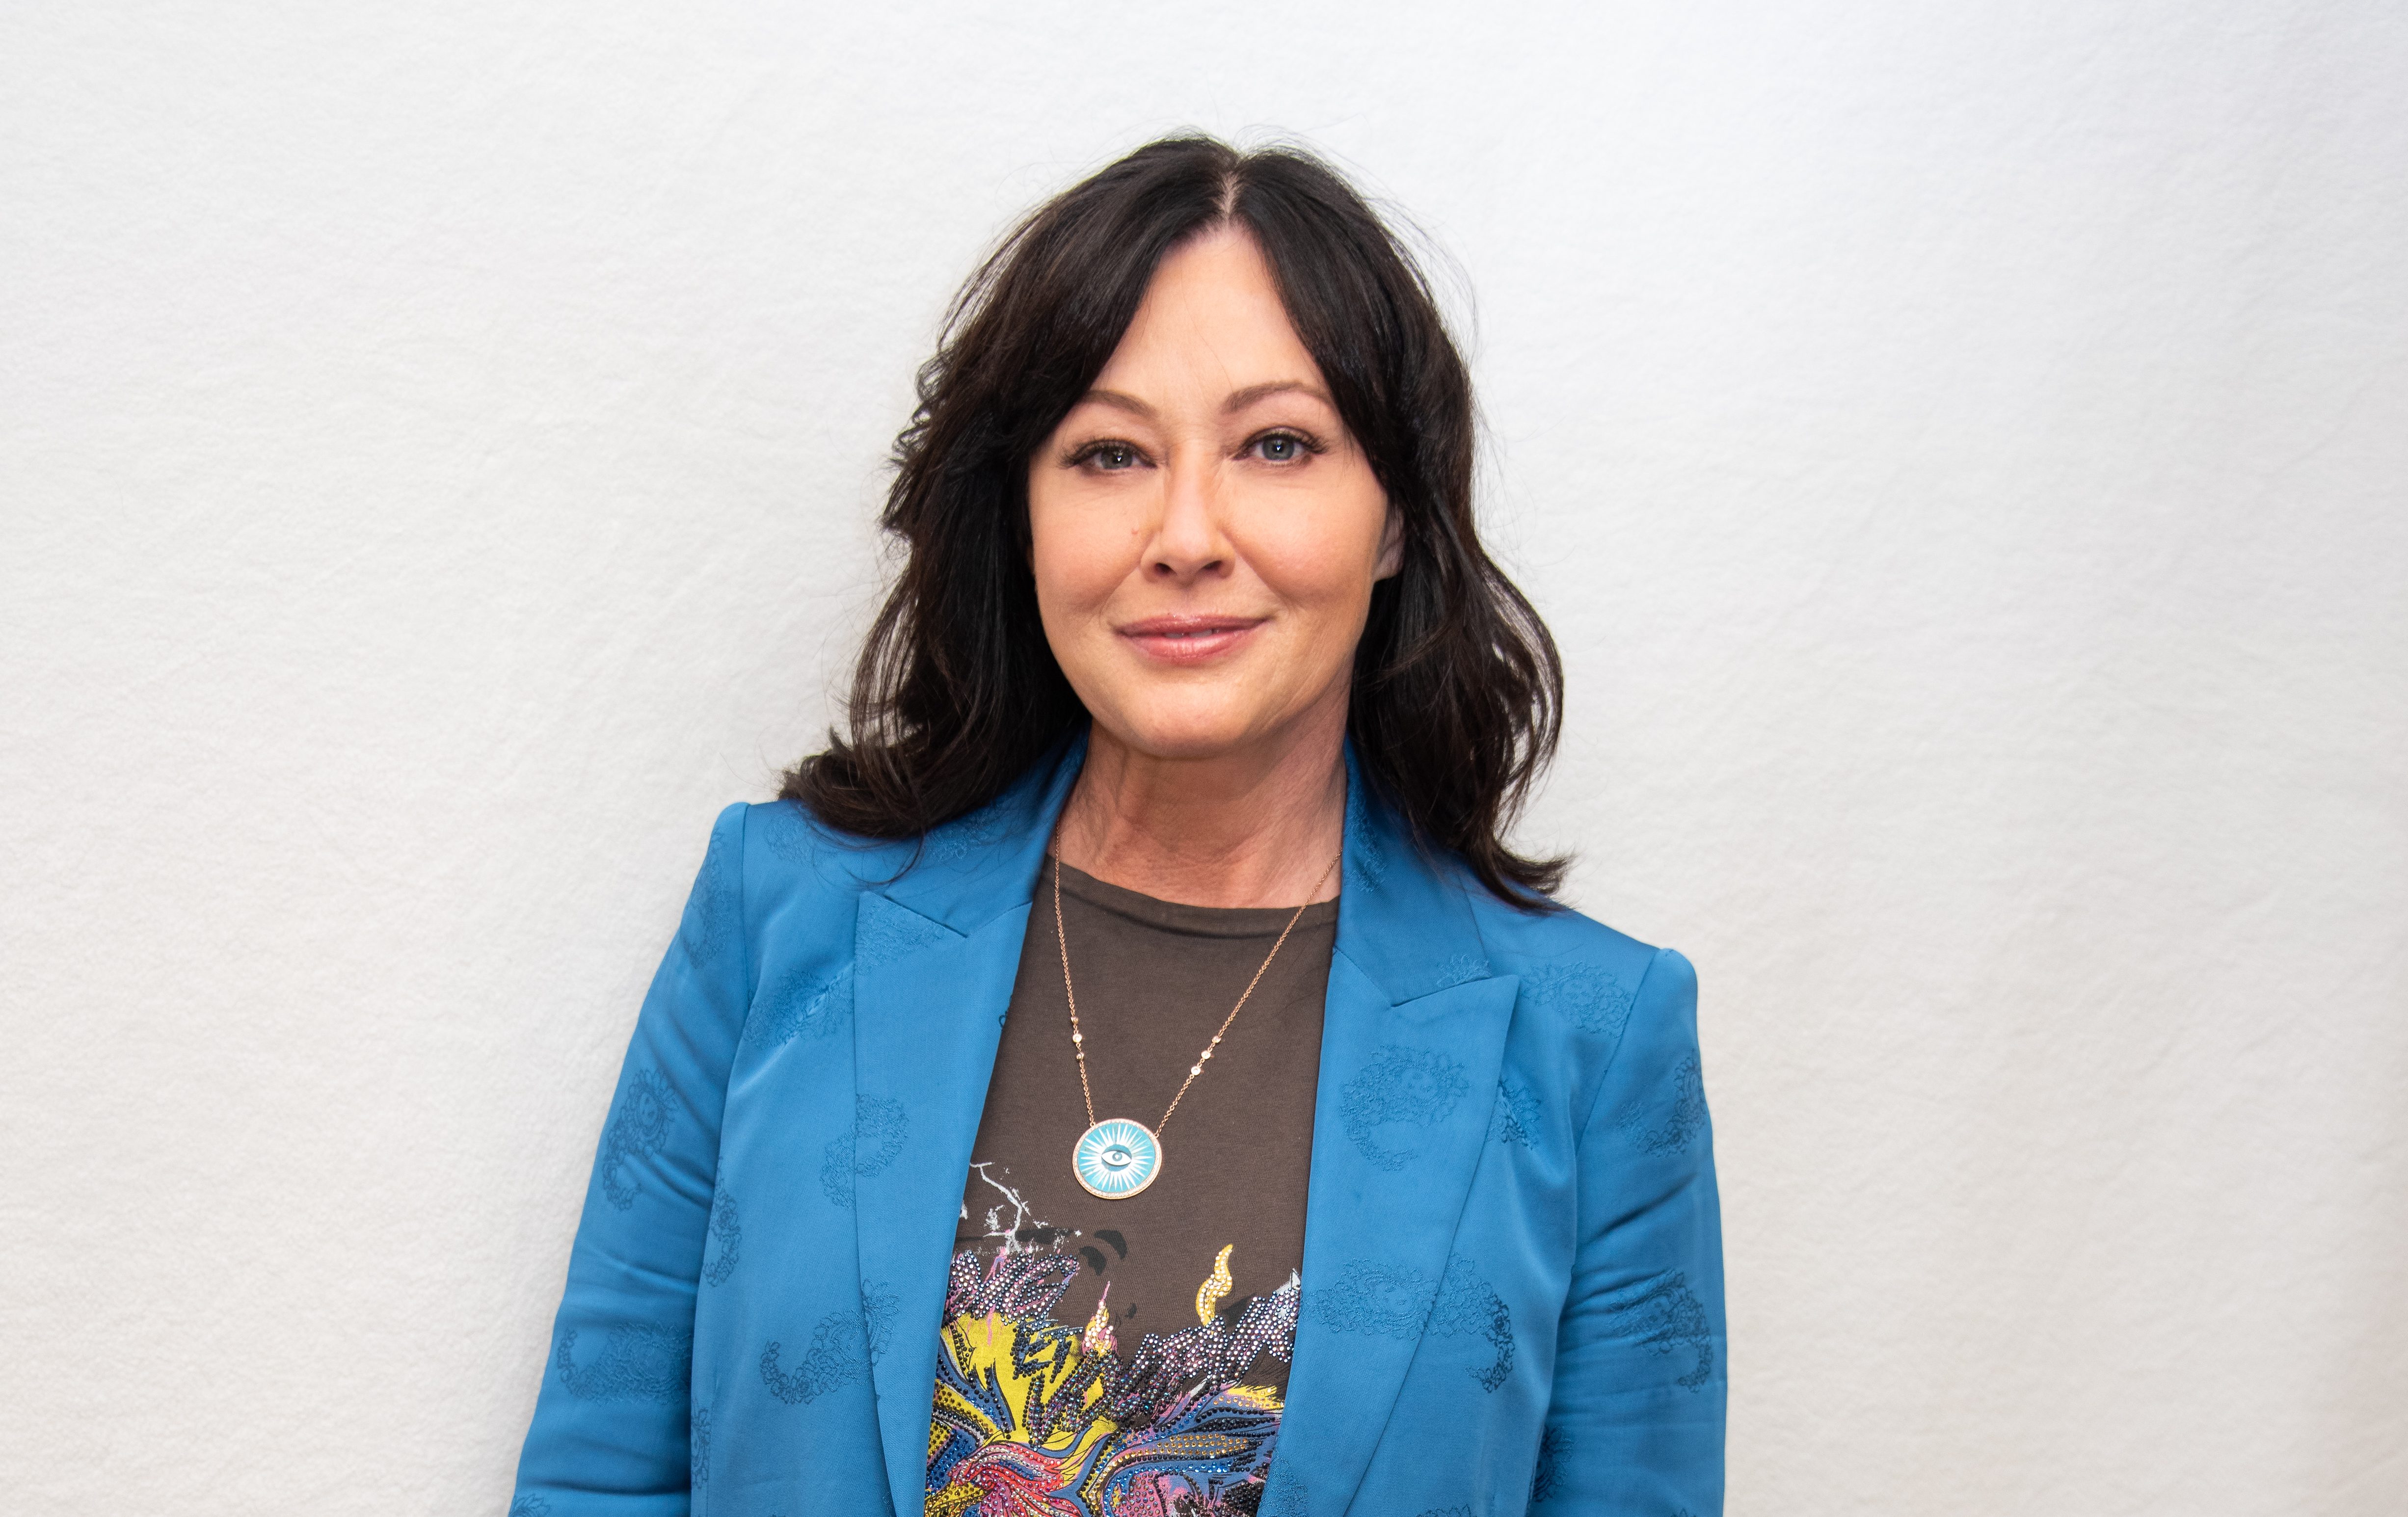 Shannen Doherty at the "BH90210" Press Conference at the Four Seasons Hotel on August 08, 2019 in Beverly Hills, California. (Photo by Vera Anderson/WireImage)